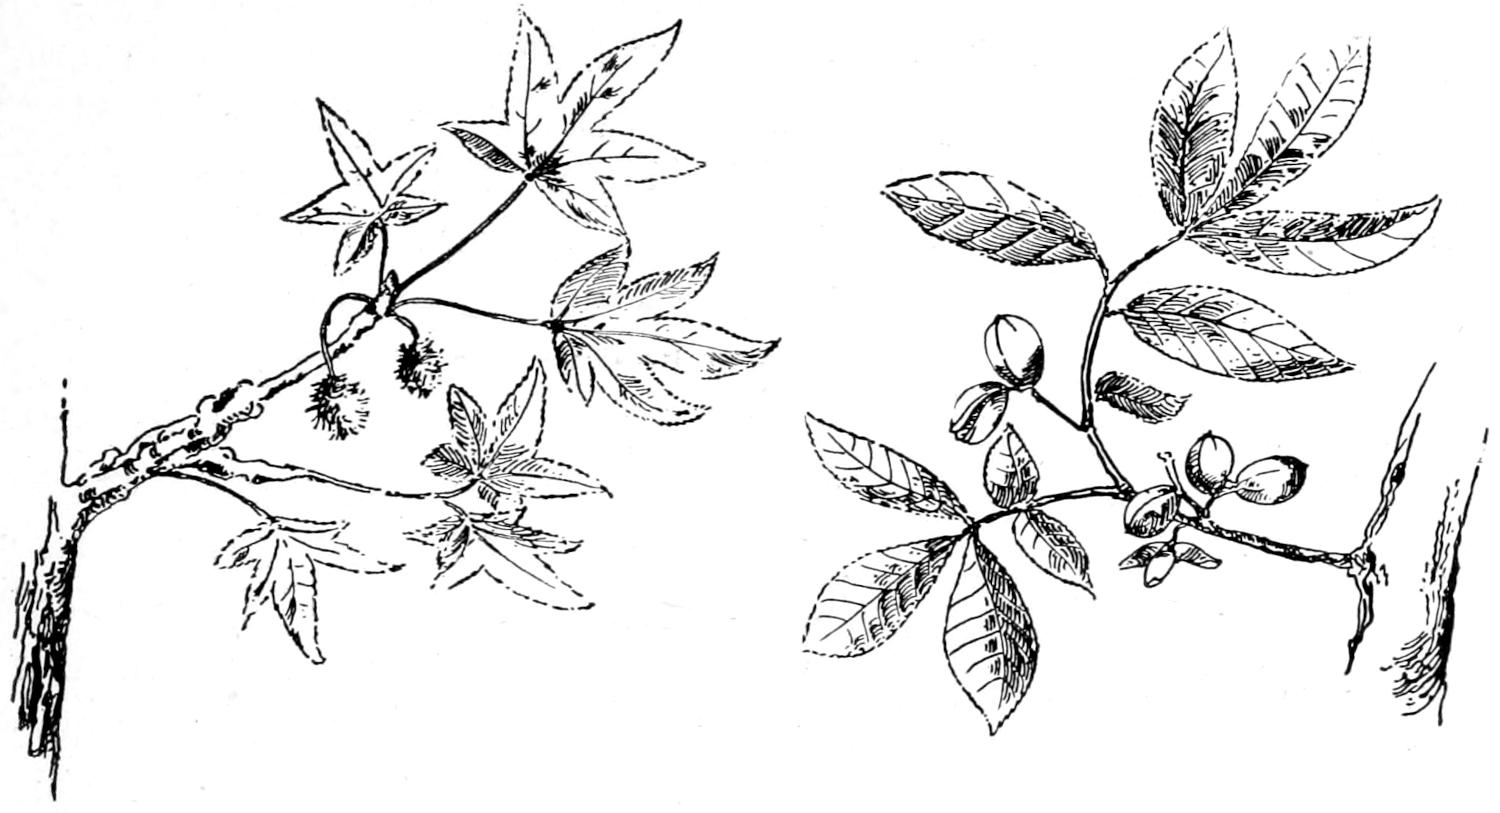 Sweet gum twig, leaves and fruits; hickory twig, leaves and nuts